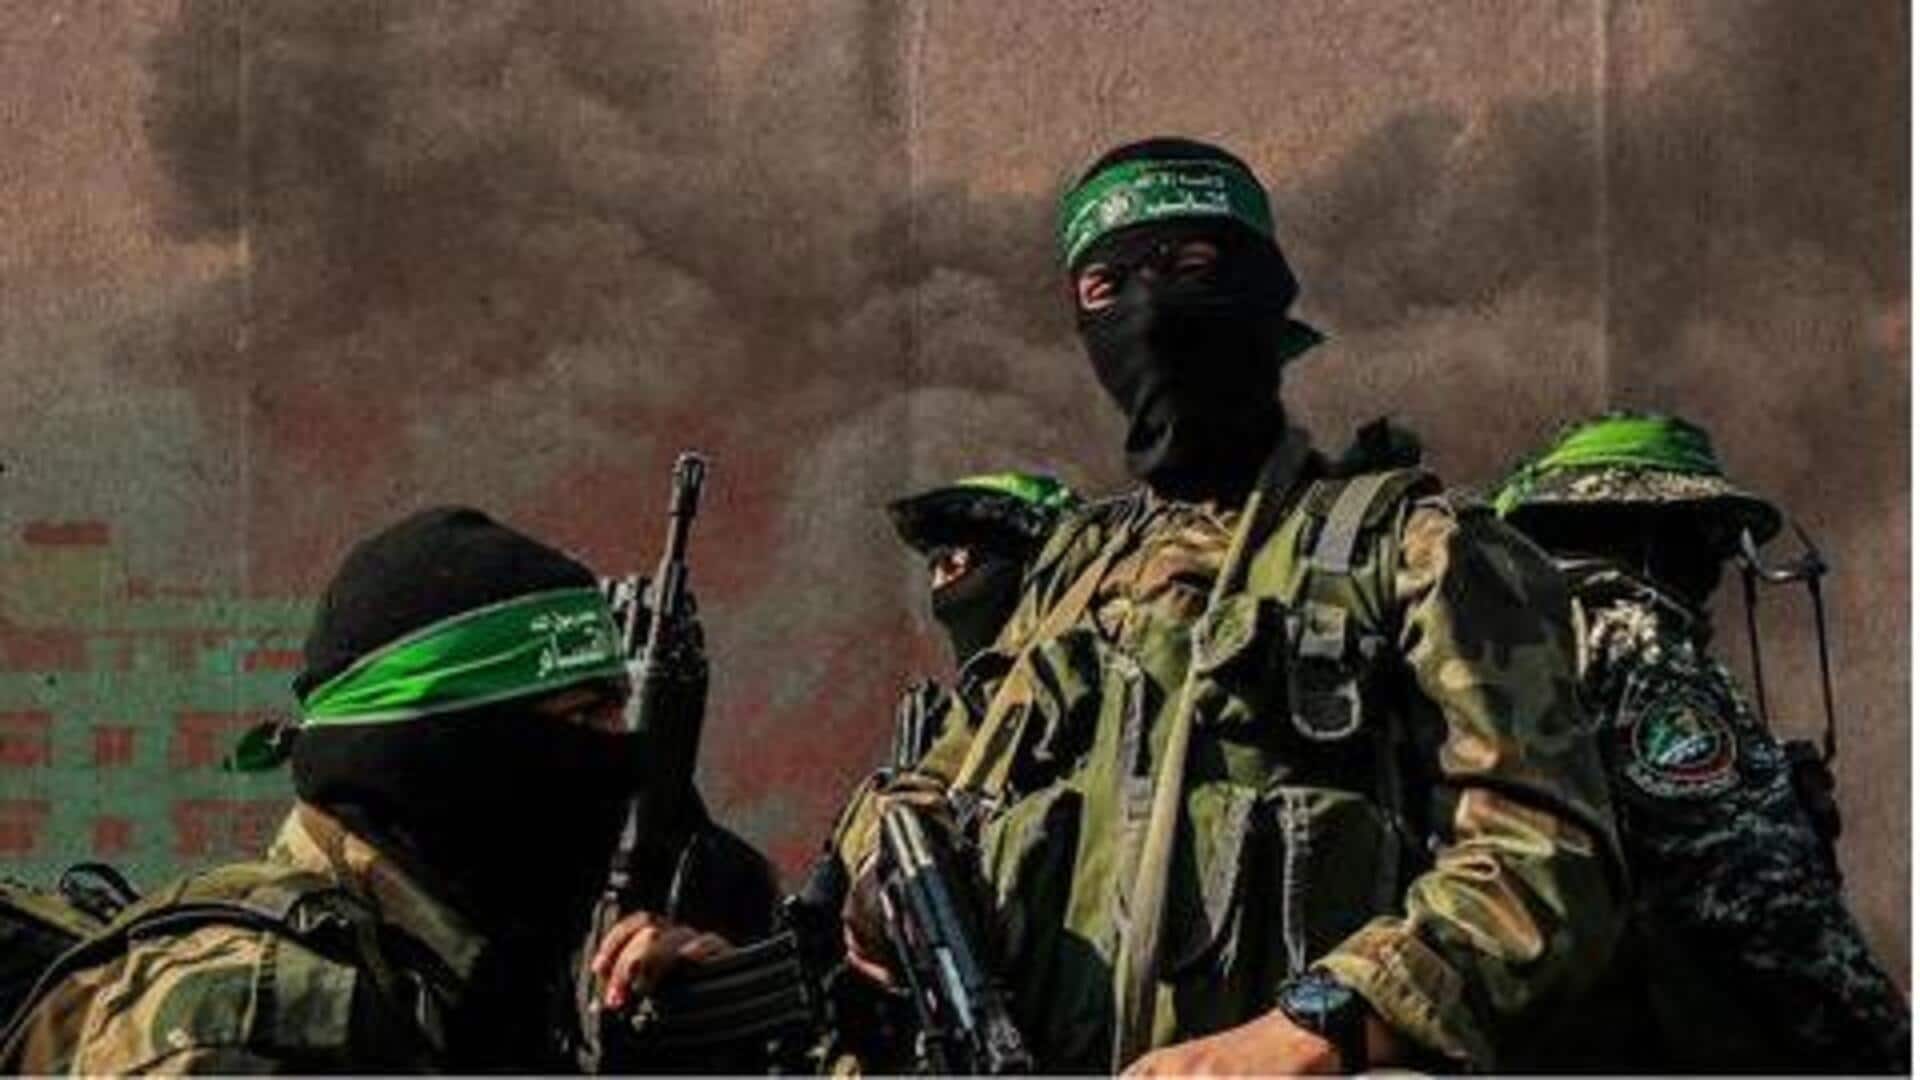 Hamas terrorists laughed as they raped corpse: October-7 attack witness